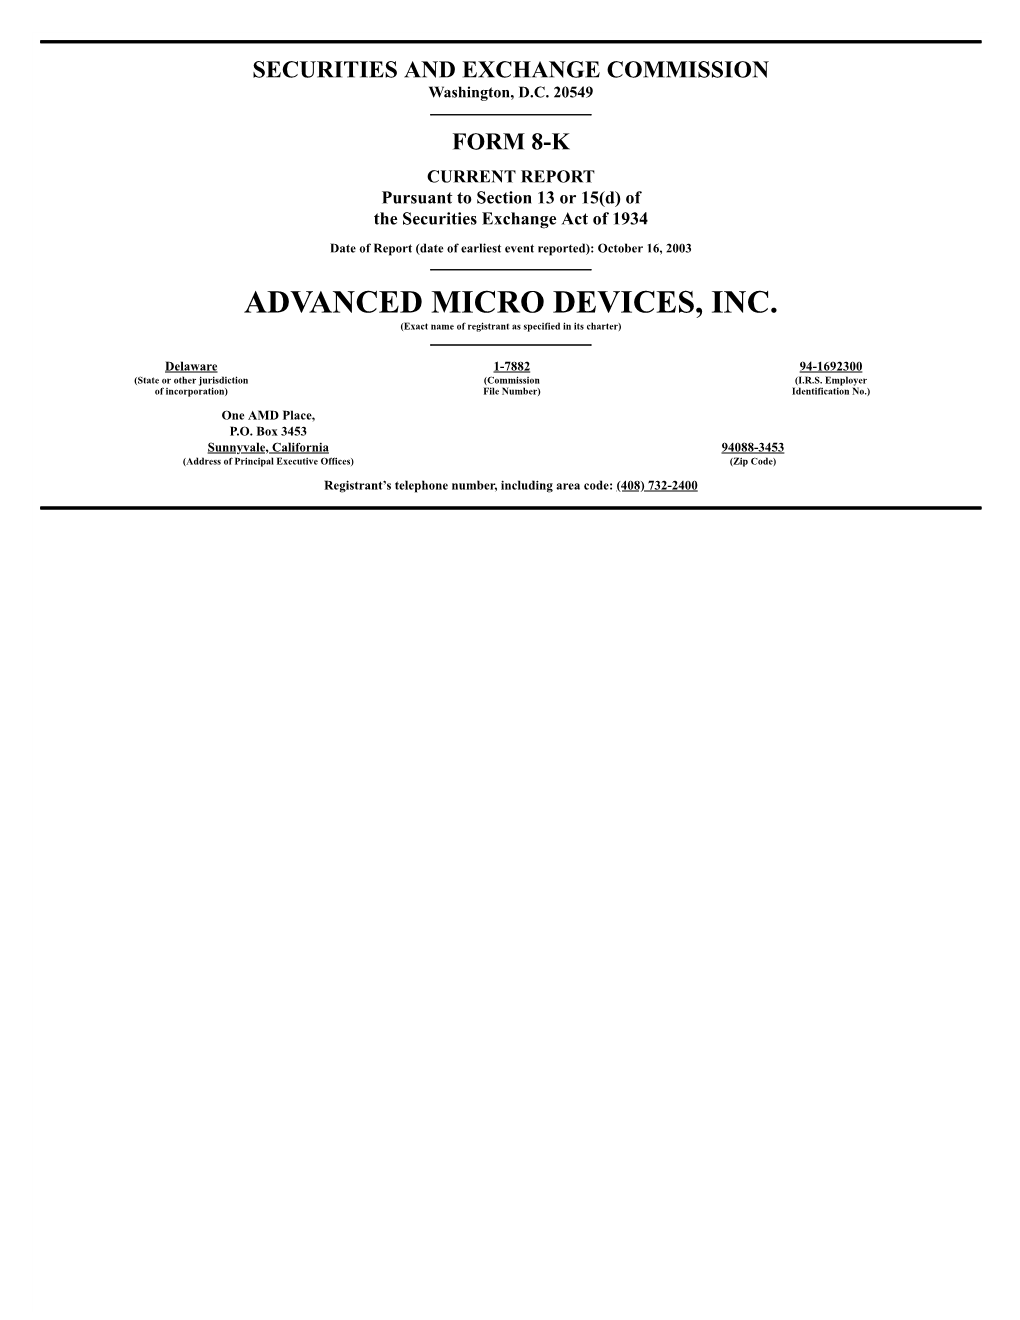 ADVANCED MICRO DEVICES, INC. (Exact Name of Registrant As Specified in Its Charter)